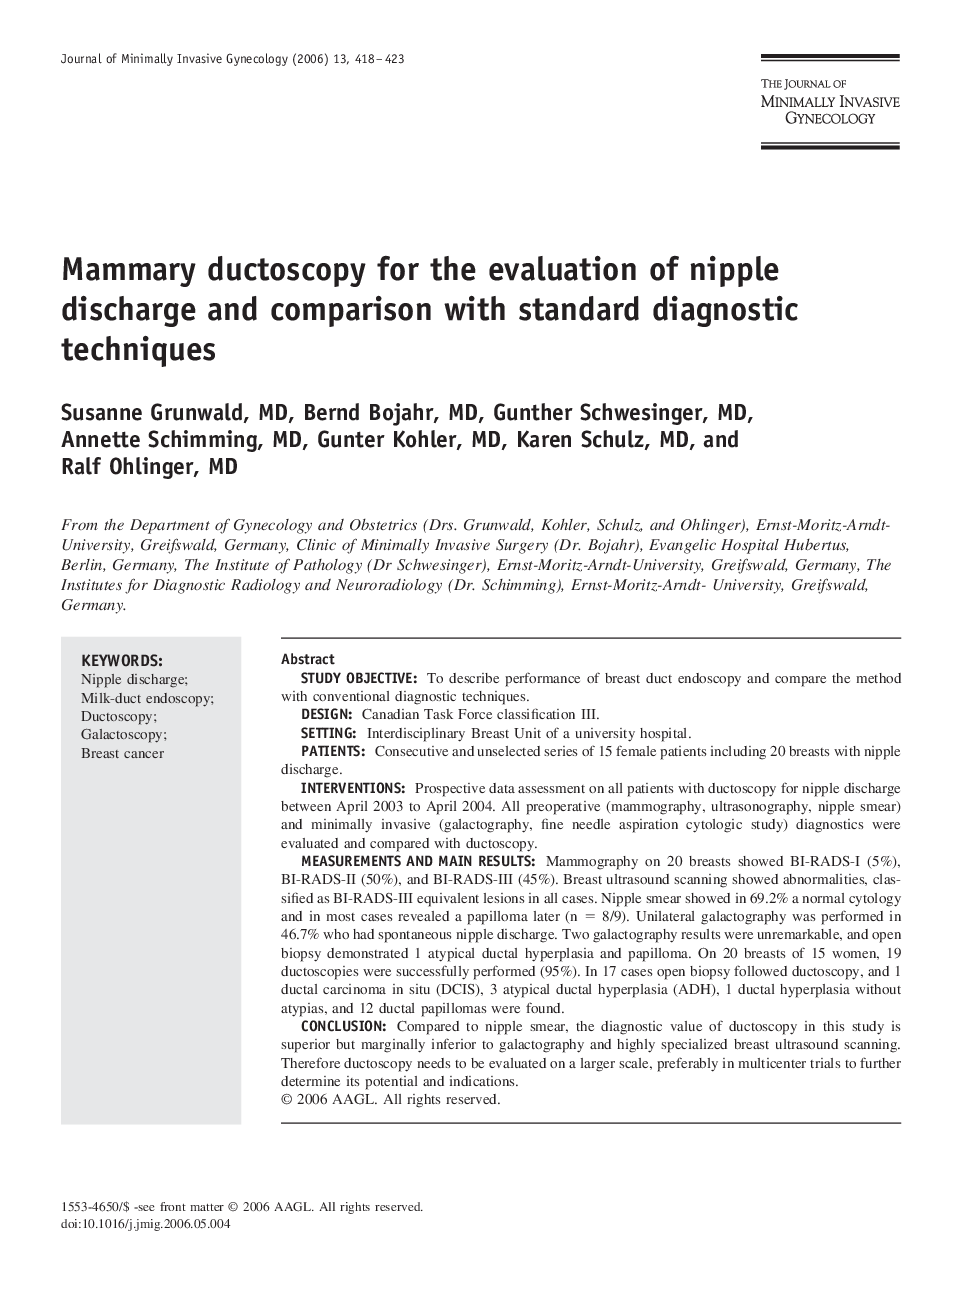 Mammary ductoscopy for the evaluation of nipple discharge and comparison with standard diagnostic techniques